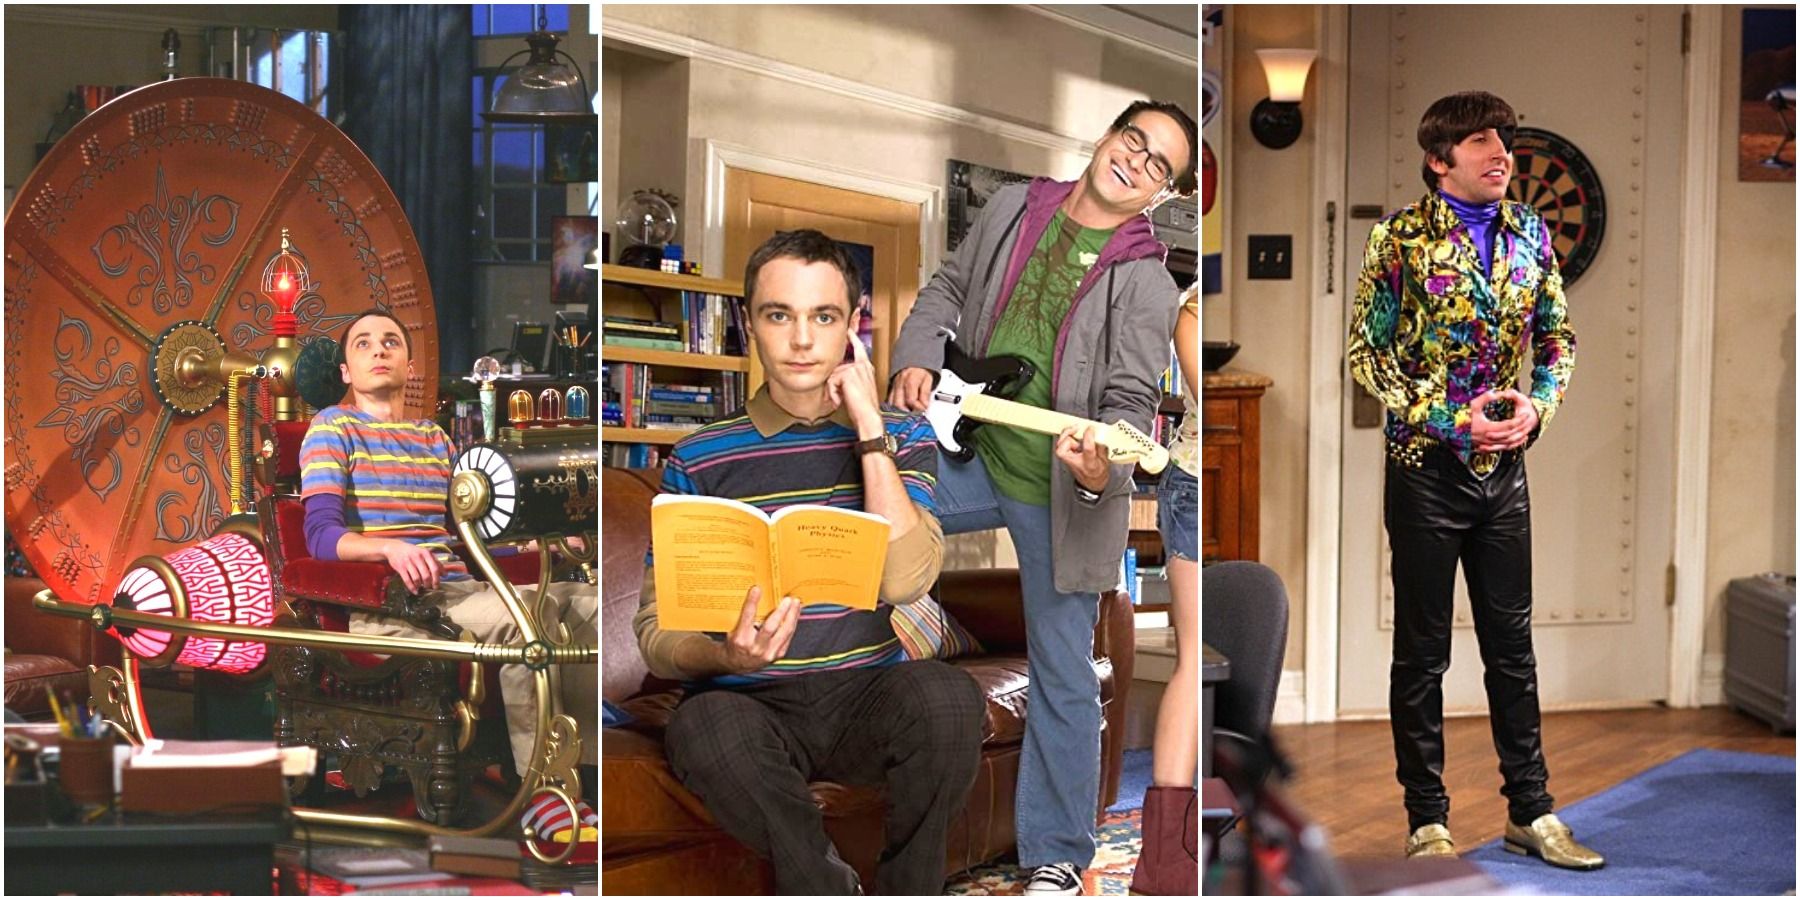 Sheldon with a time machine, reading a book, and Howard picking up girls from The Big Bang Theory